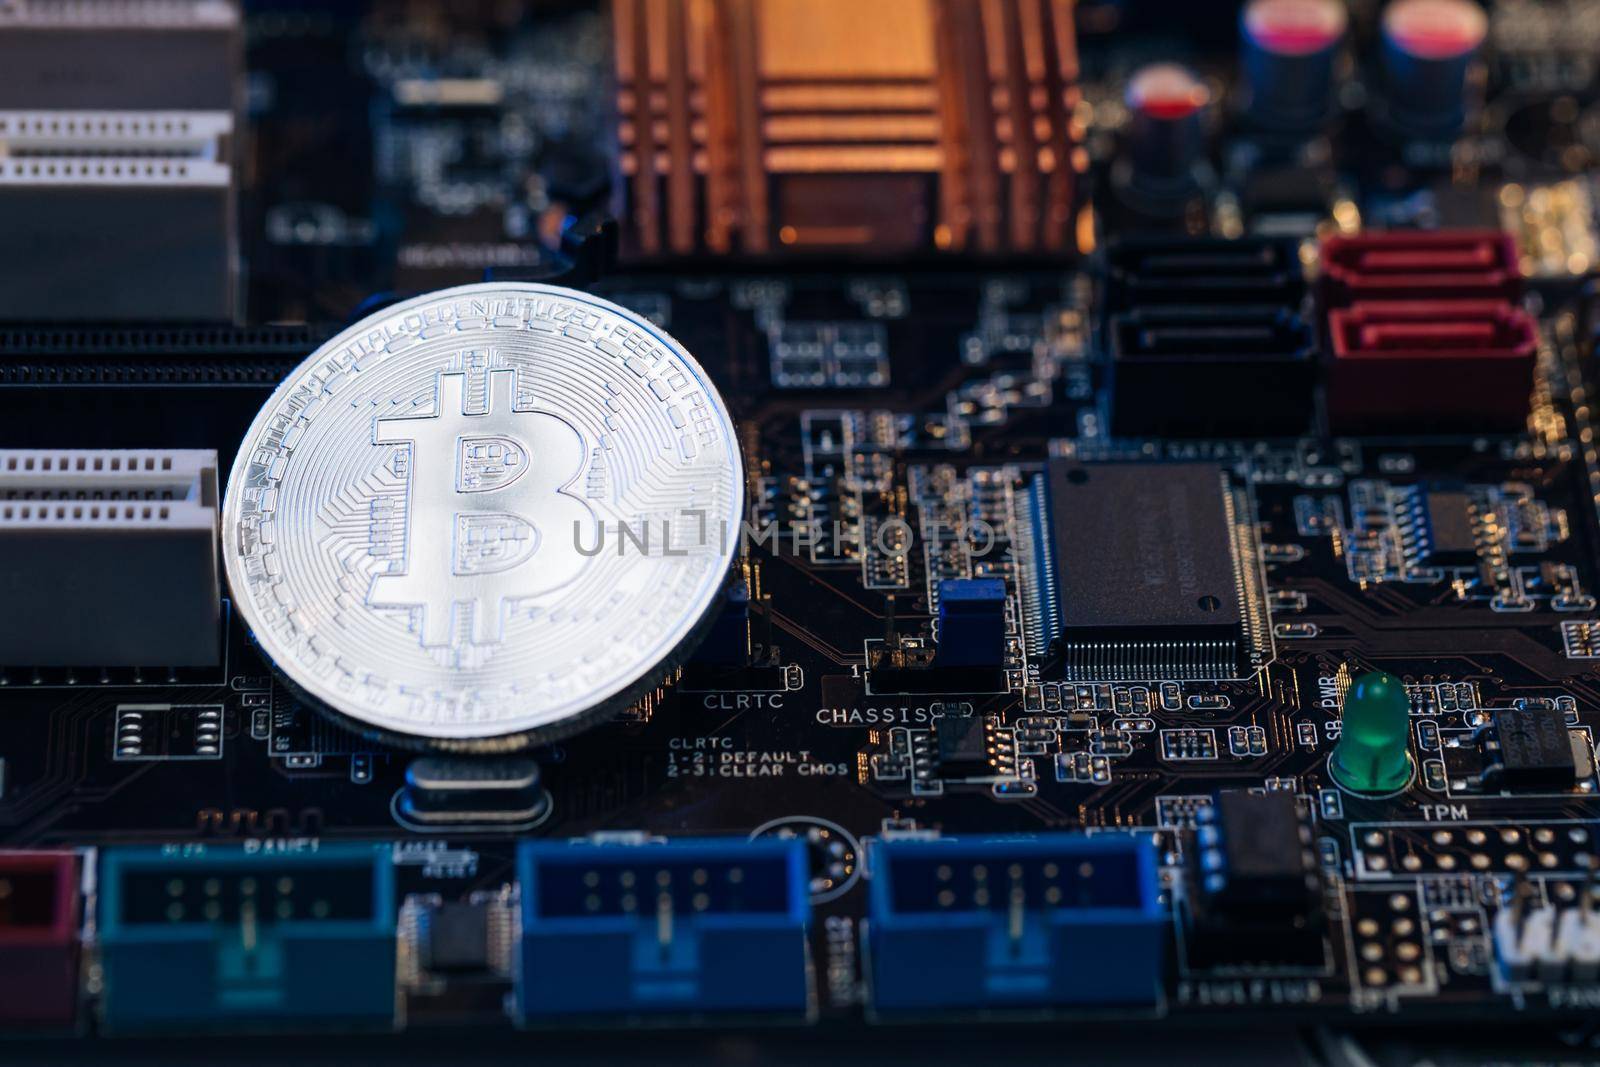 Bitcoin. Crypto currency Bitcoin, BTC, Bit Coin. Macro shot of Bitcoin coins isolated on motherboard background. by uflypro